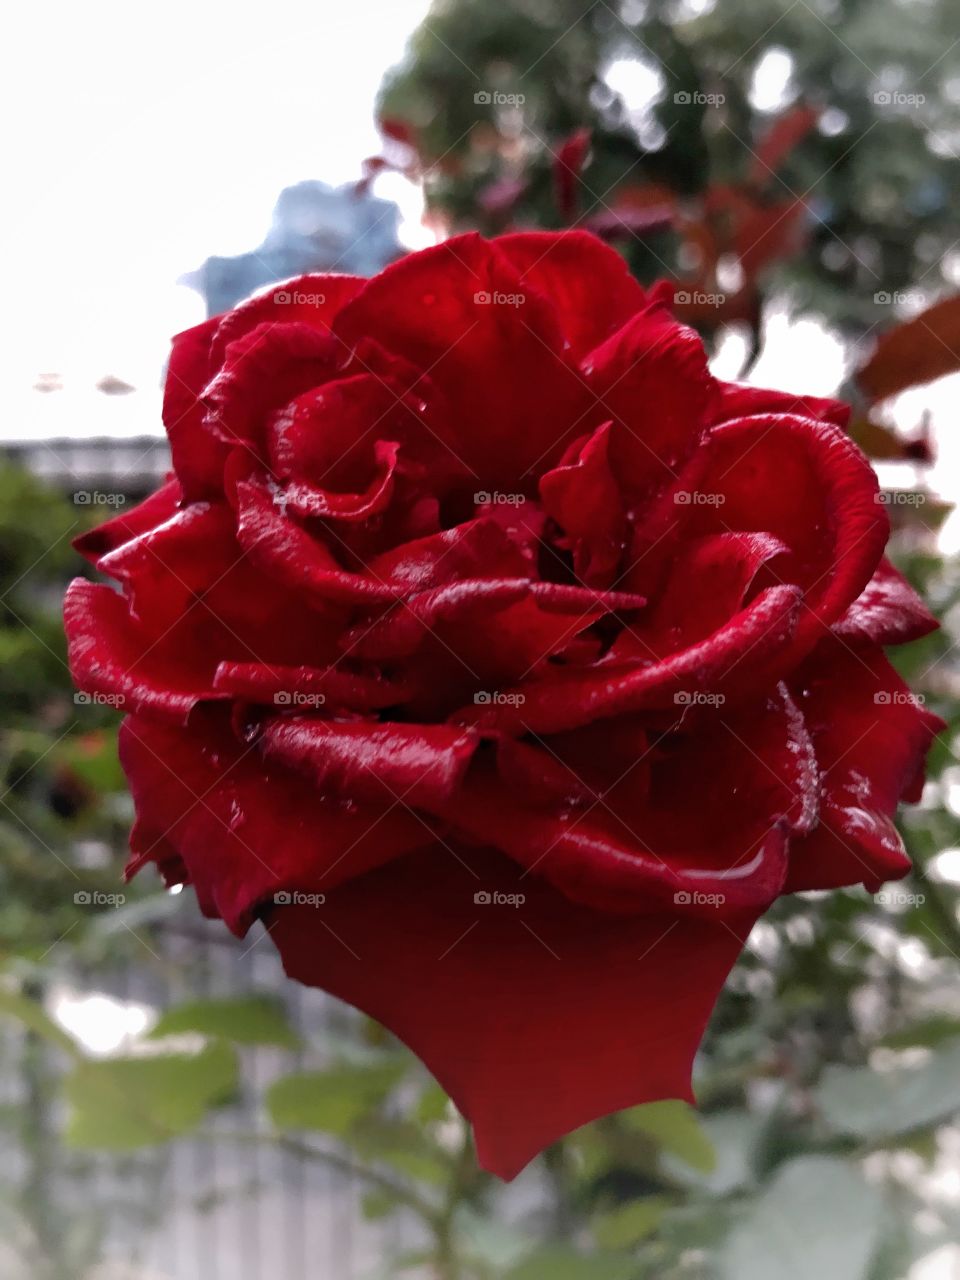 Red Rose, after a rainy day, holding its beauty and majesty in a garden in a big city downtown 